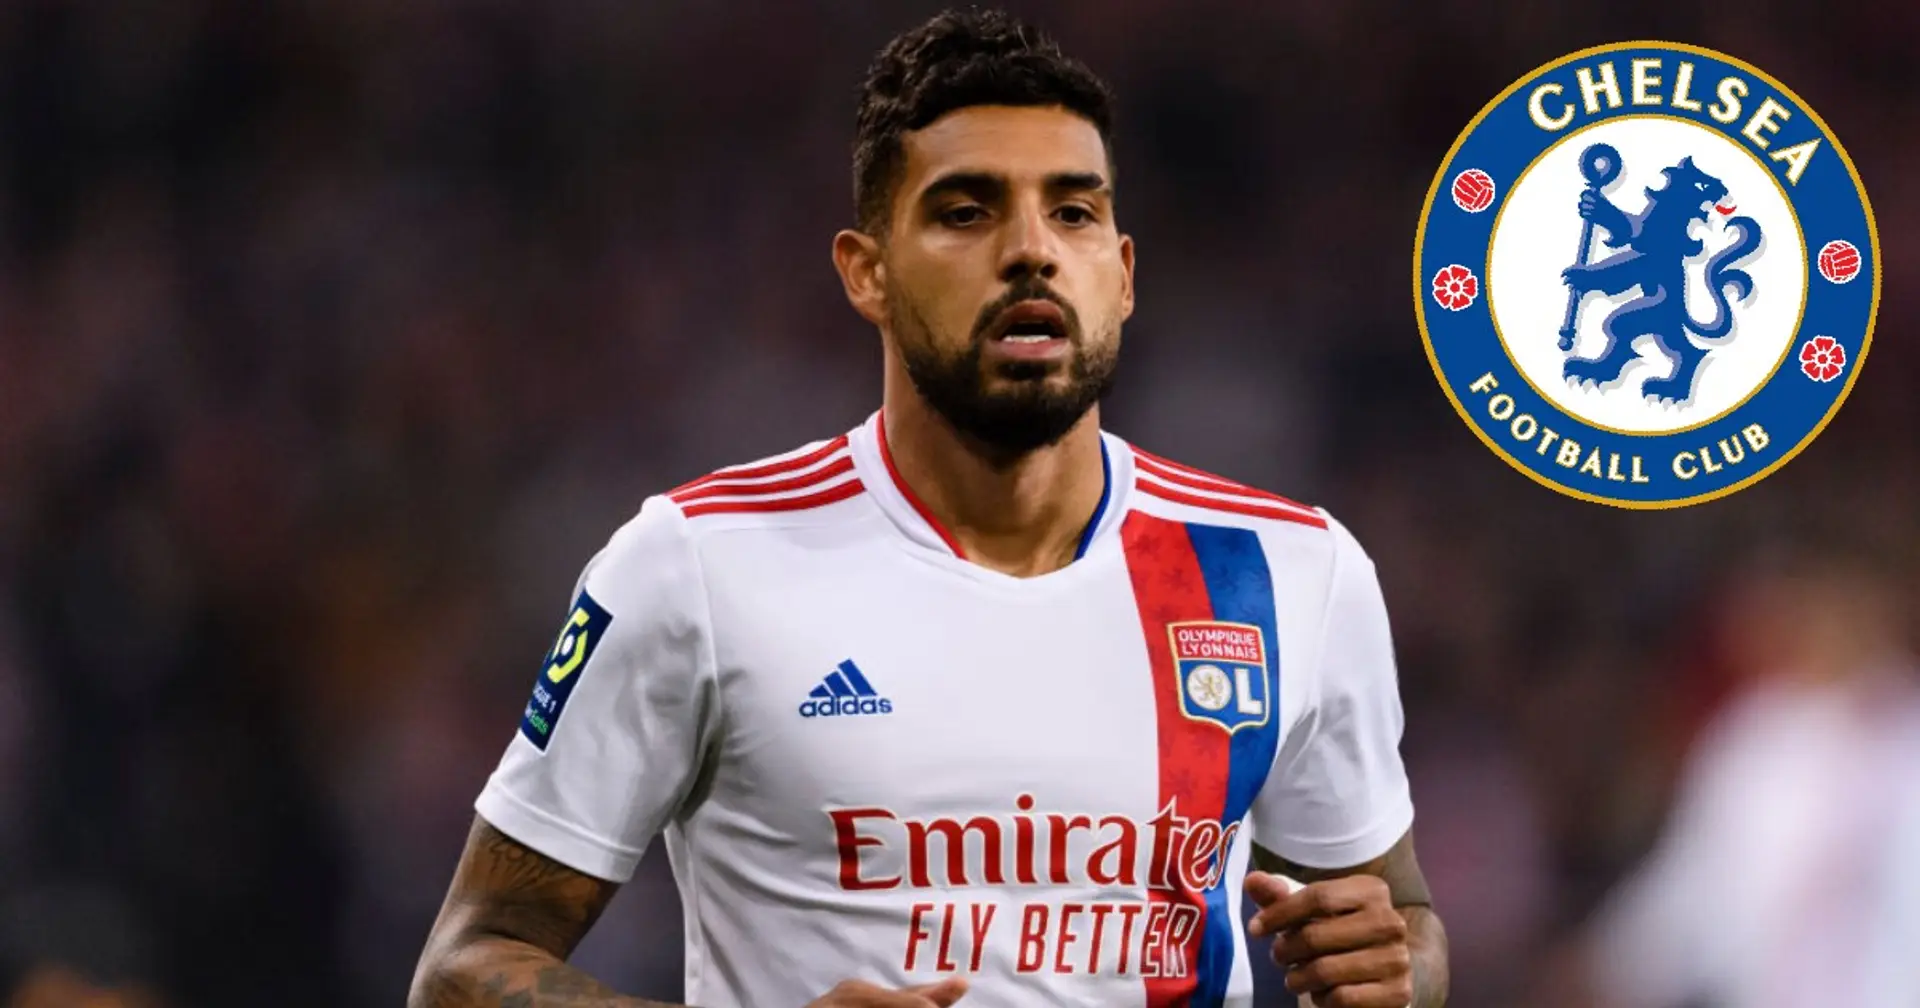 Emerson expected to return to Chelsea as Lyon unable to afford his wages (reliability: 3 stars)